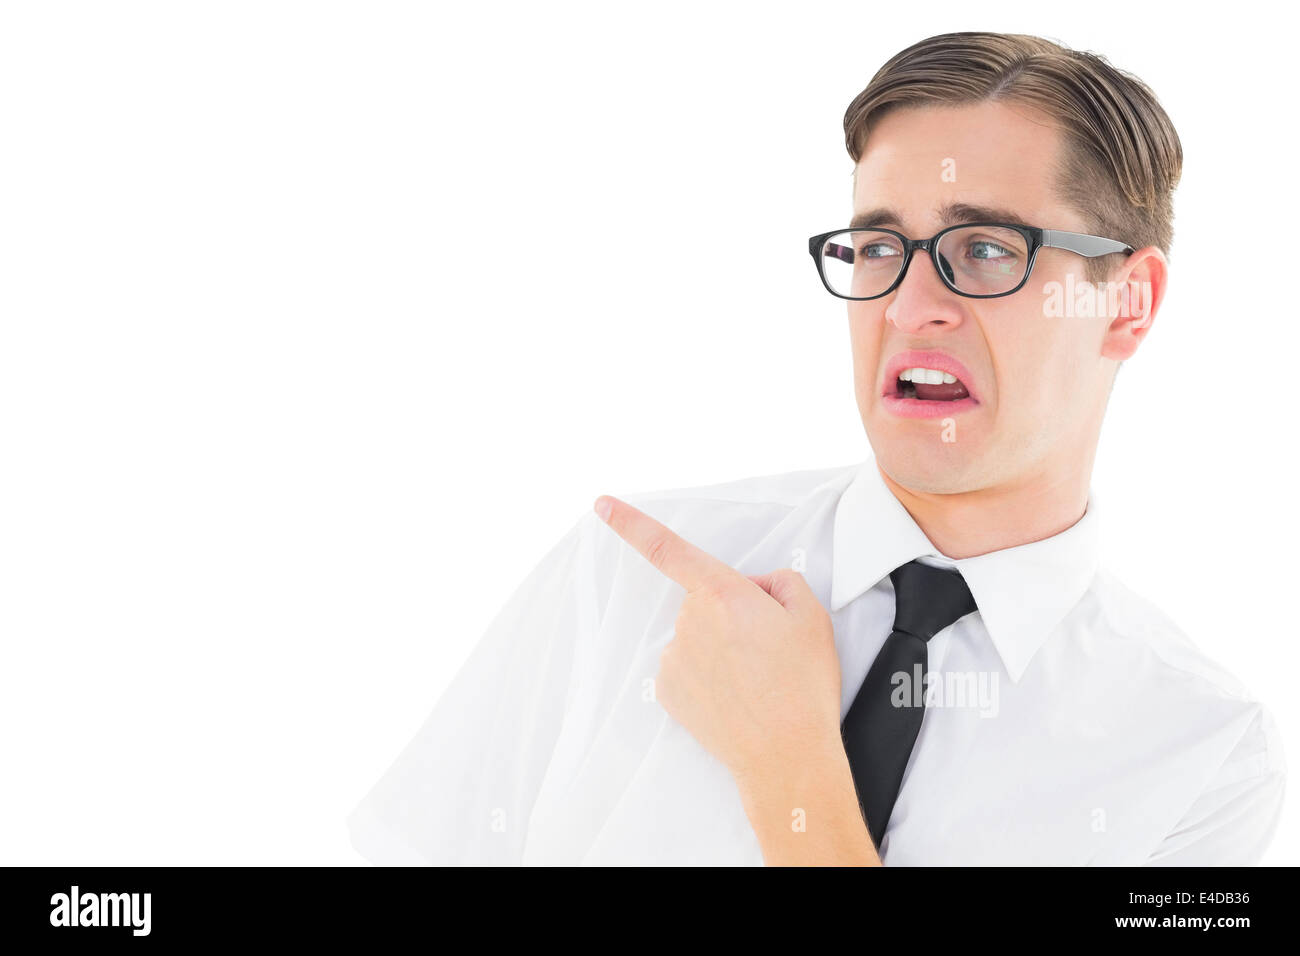 Geeky young hipster pointing with disgust Stock Photo